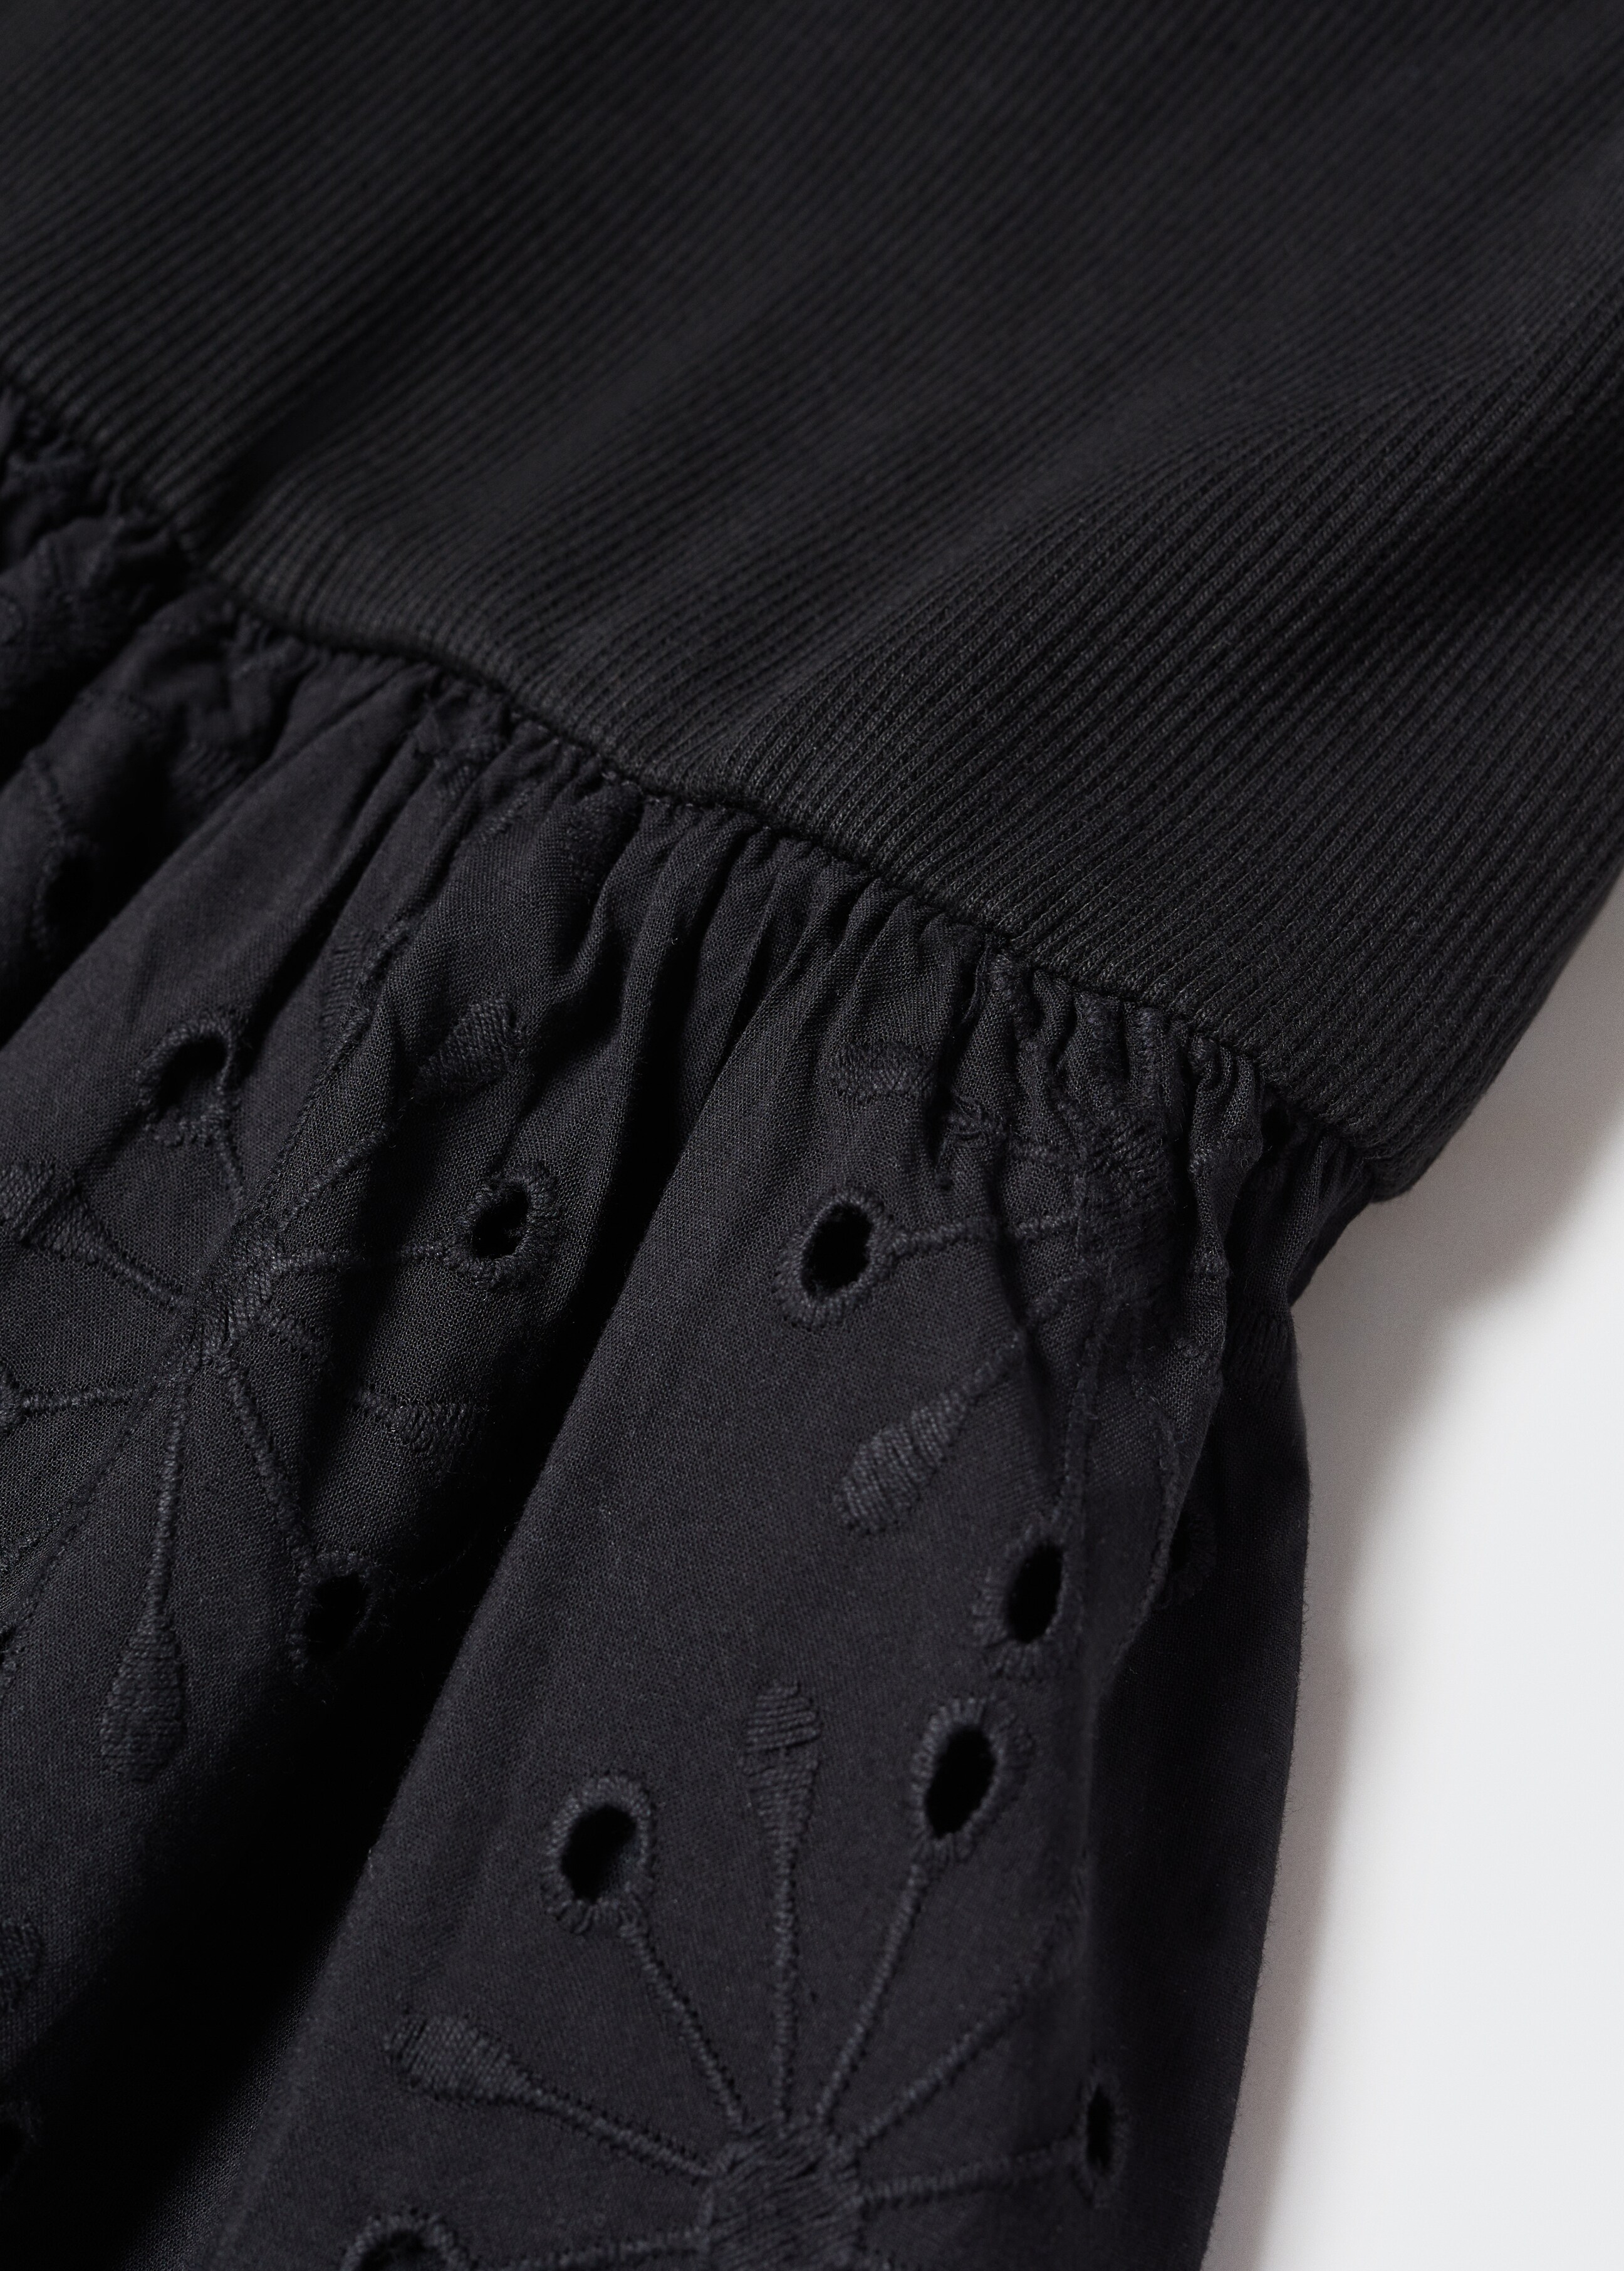 Embroidered dress - Details of the article 8